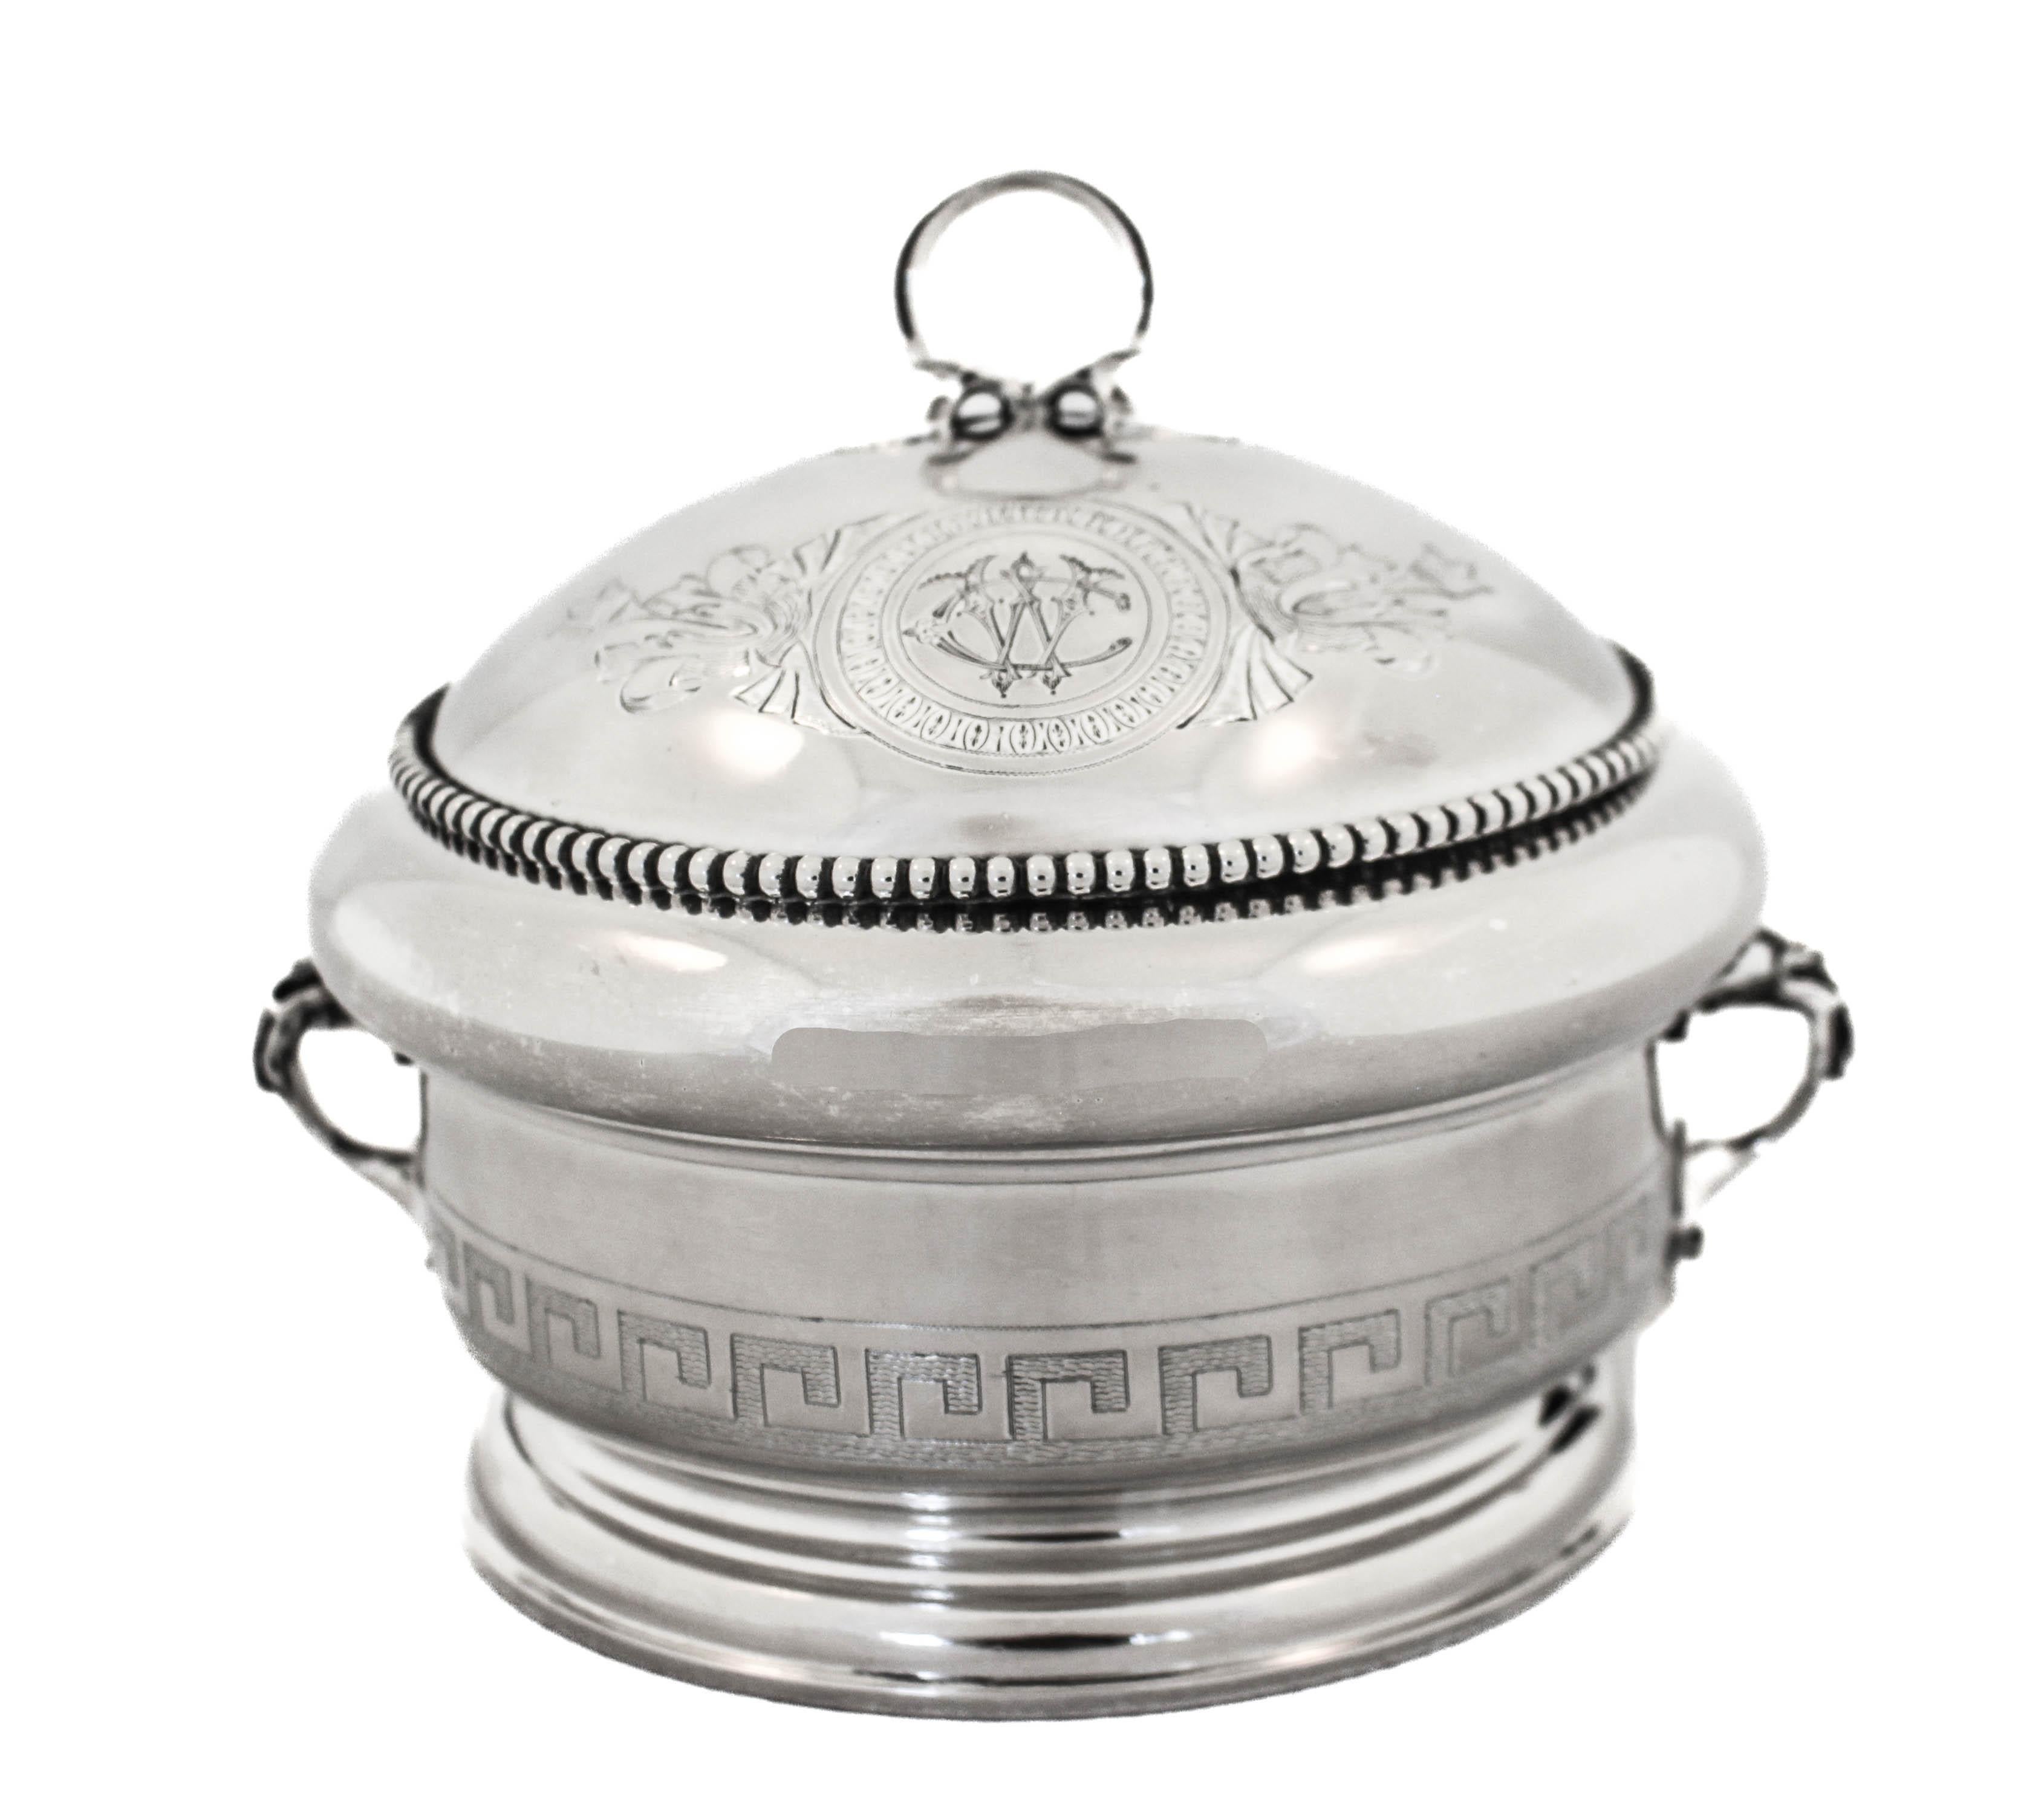 Being offered in an antique caviar dish with a cover by Gorham Silversmiths of Providence, Rhode Island.  There is a removable disc / surface on the inside and ice is placed underneath and the caviar is placed on that surface so it stays chilled. 